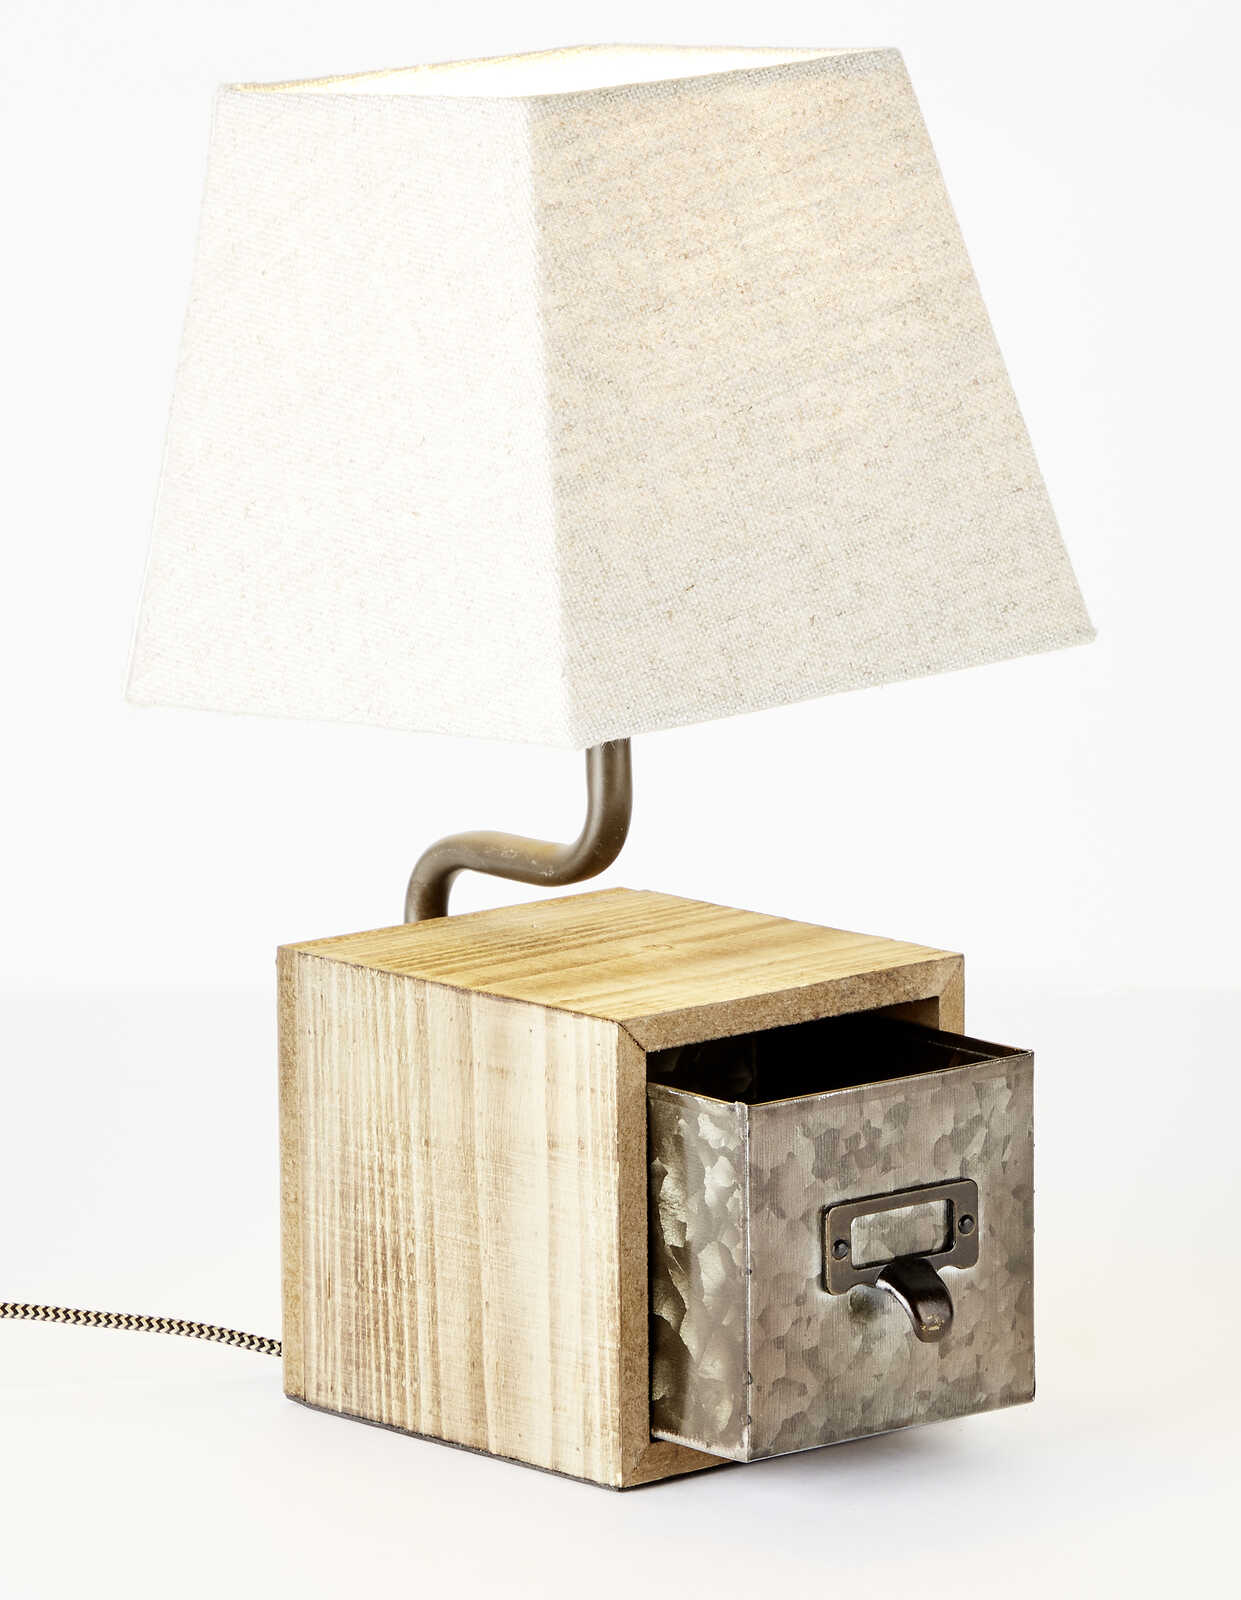             Wooden table lamp - Dominic - Brown
        